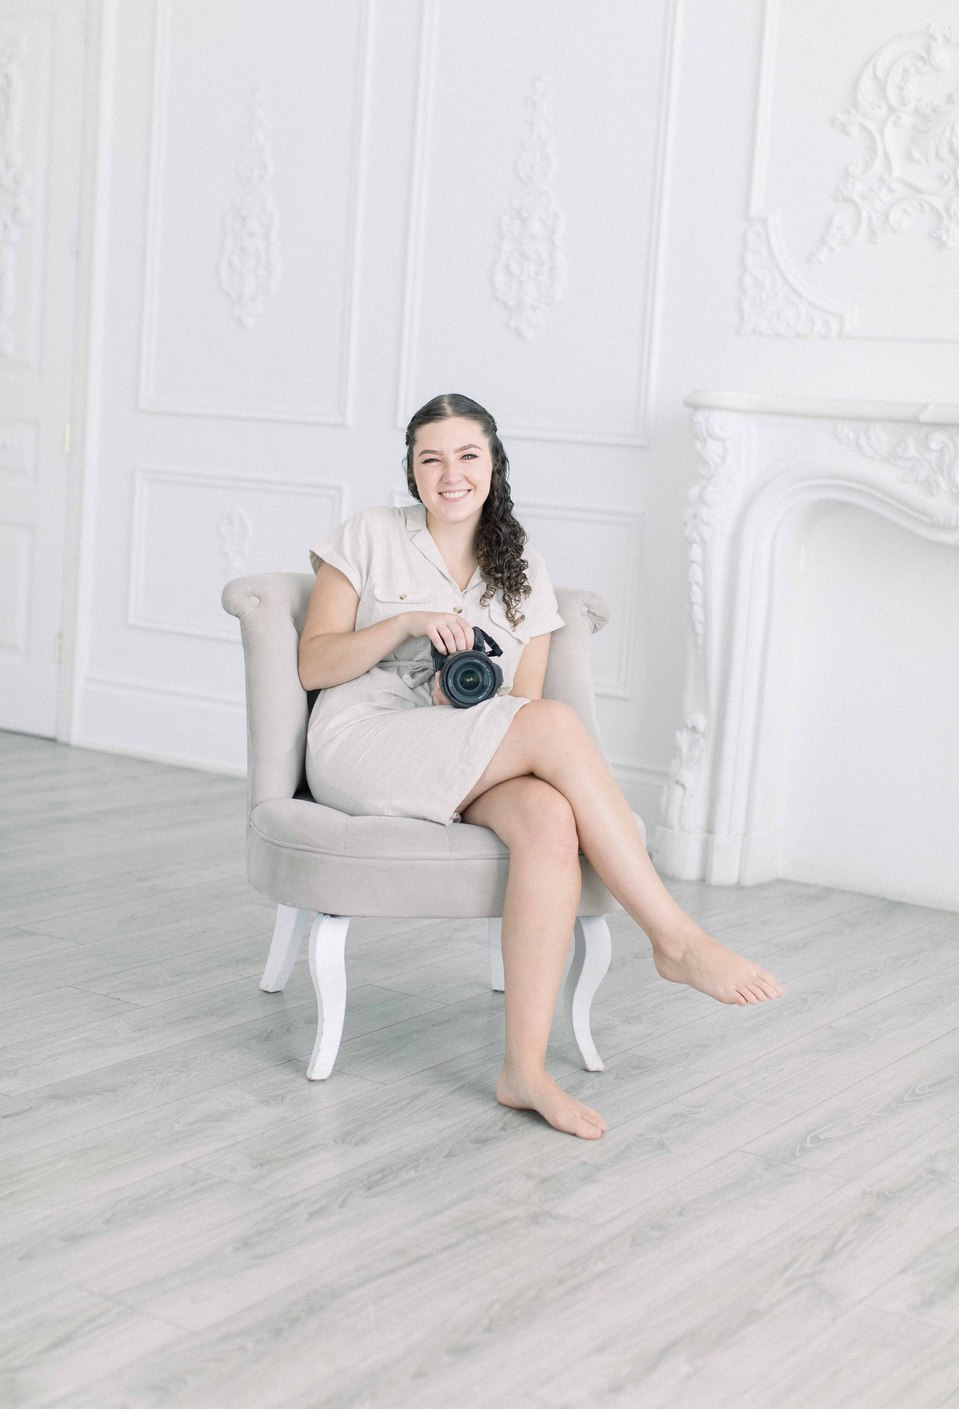 Portrait of woman sitting on chair smiling while holding a camera. Niagara portrait photography, Niagara portrait photographer, Niagara branding photography, Niagara branding photographer, Niagara family photography, Niagara family photographer.